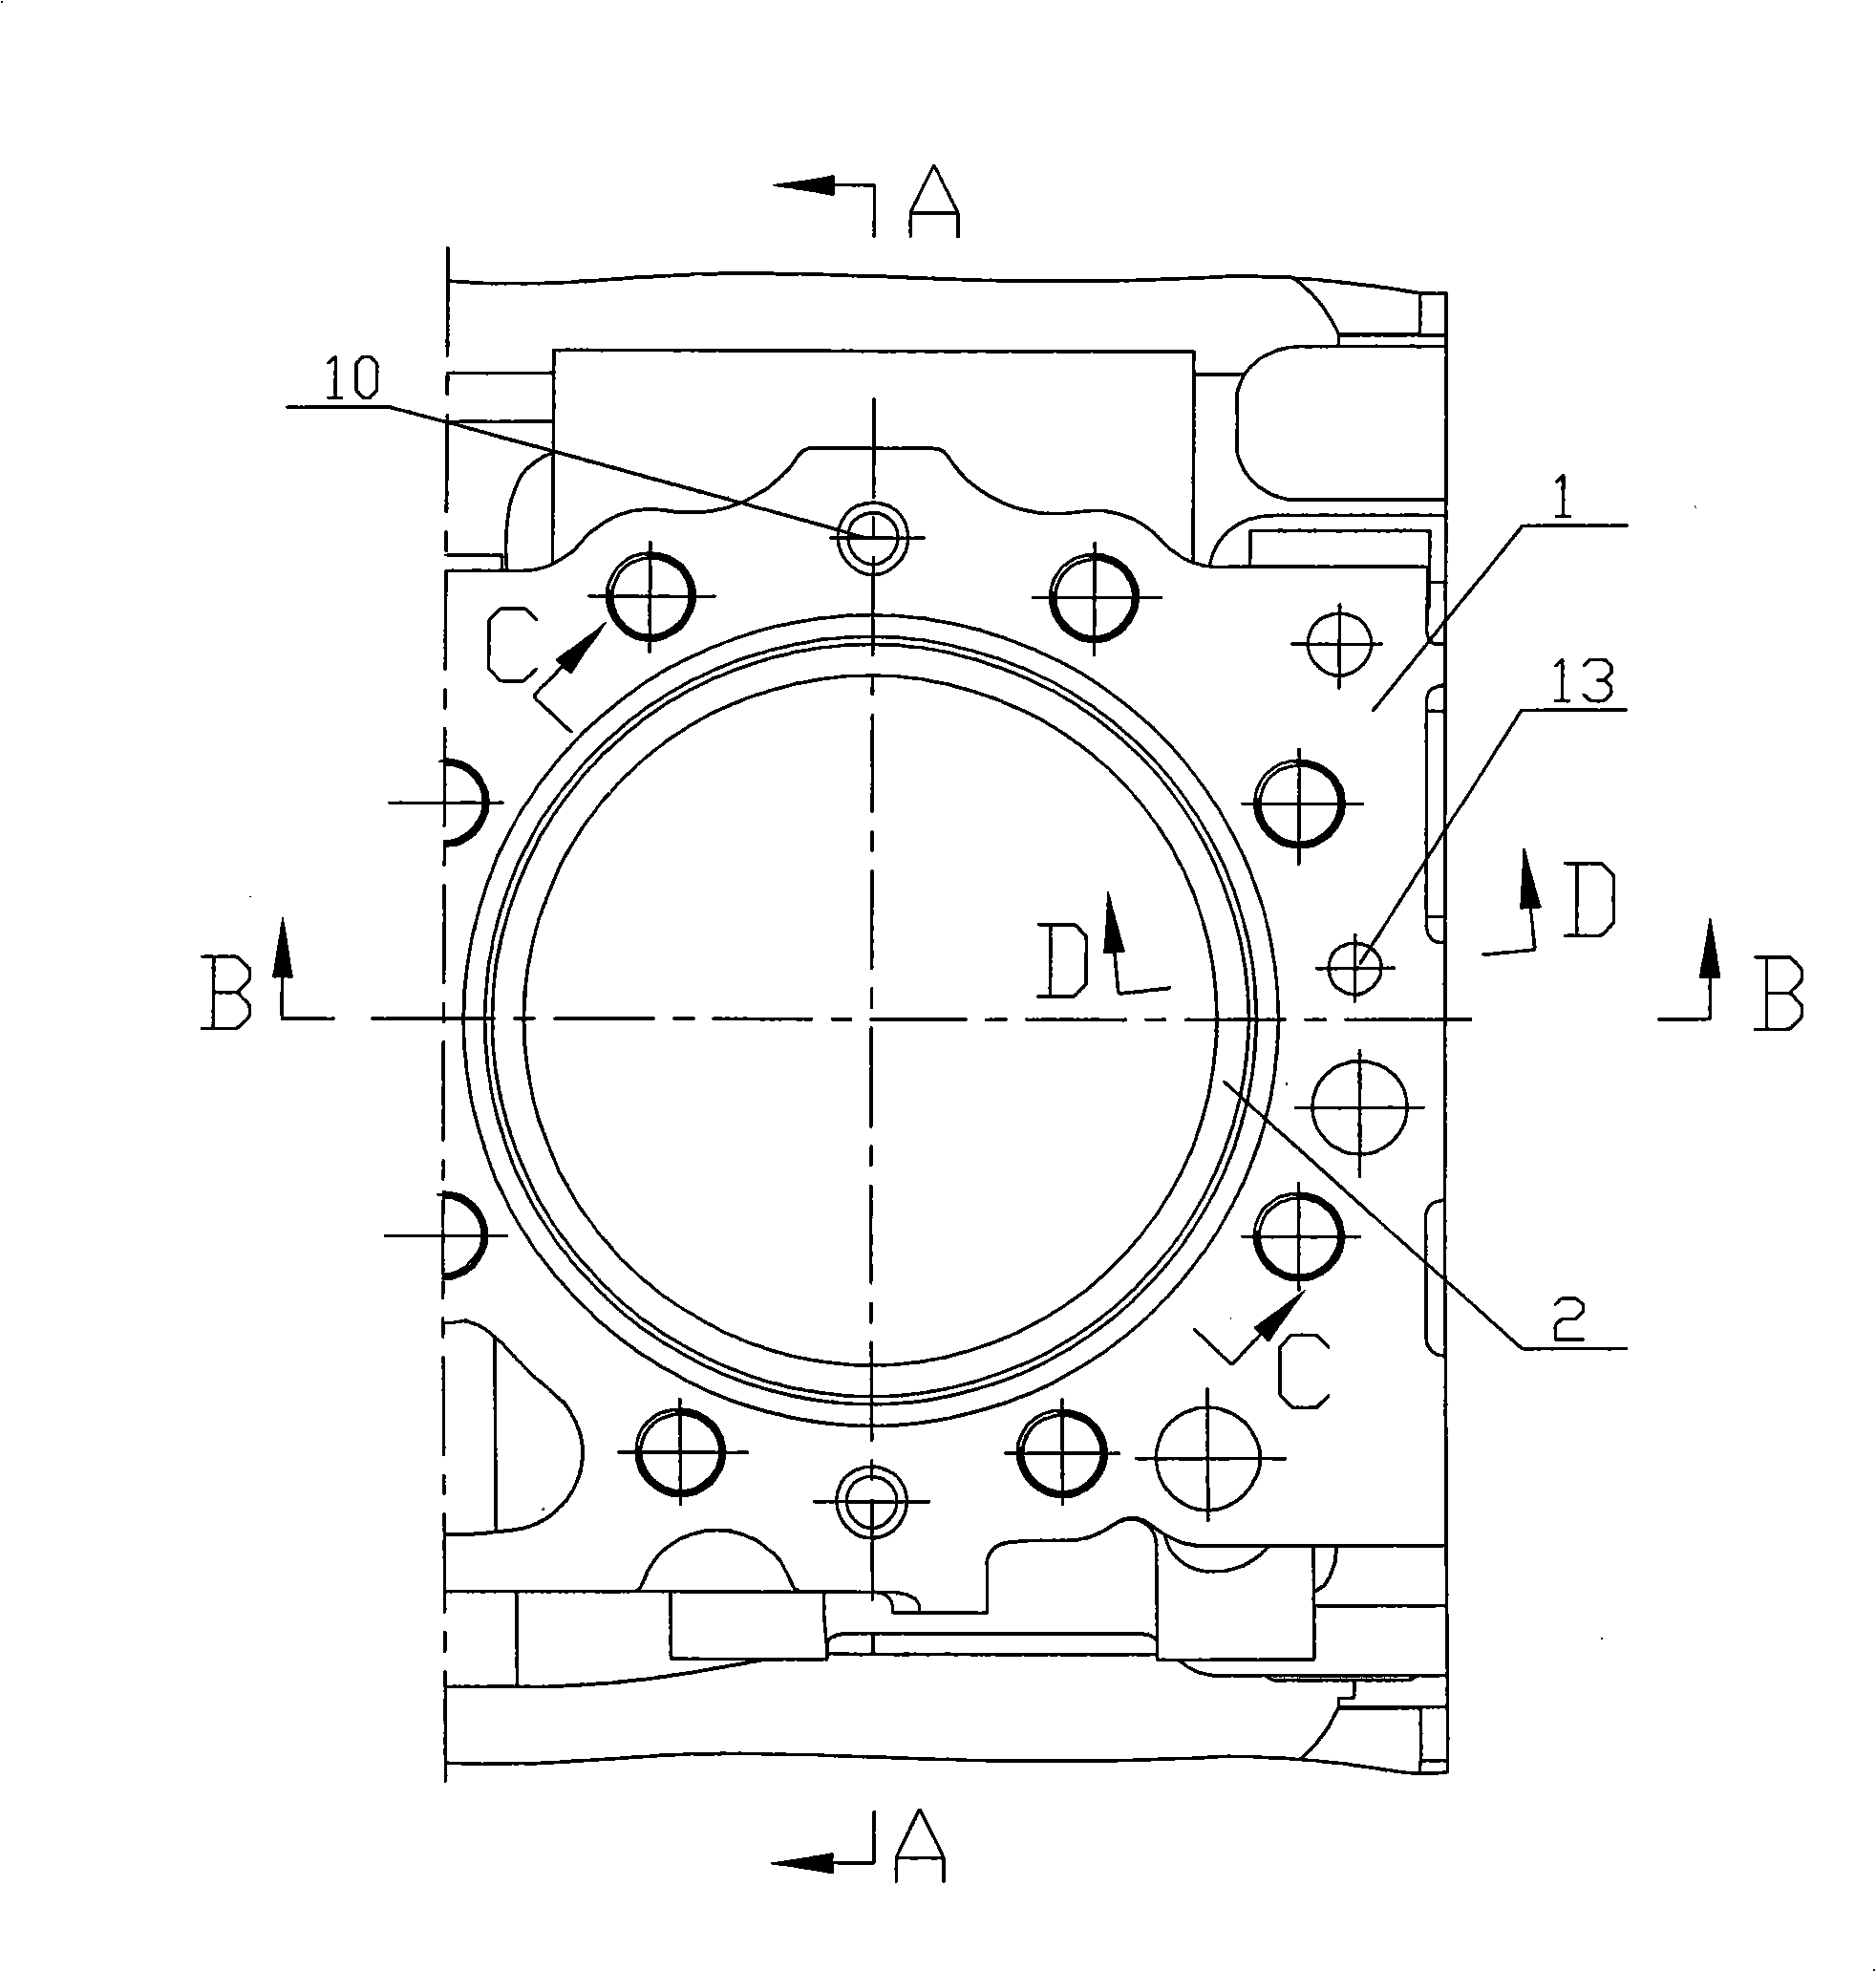 Water-cooled engine body